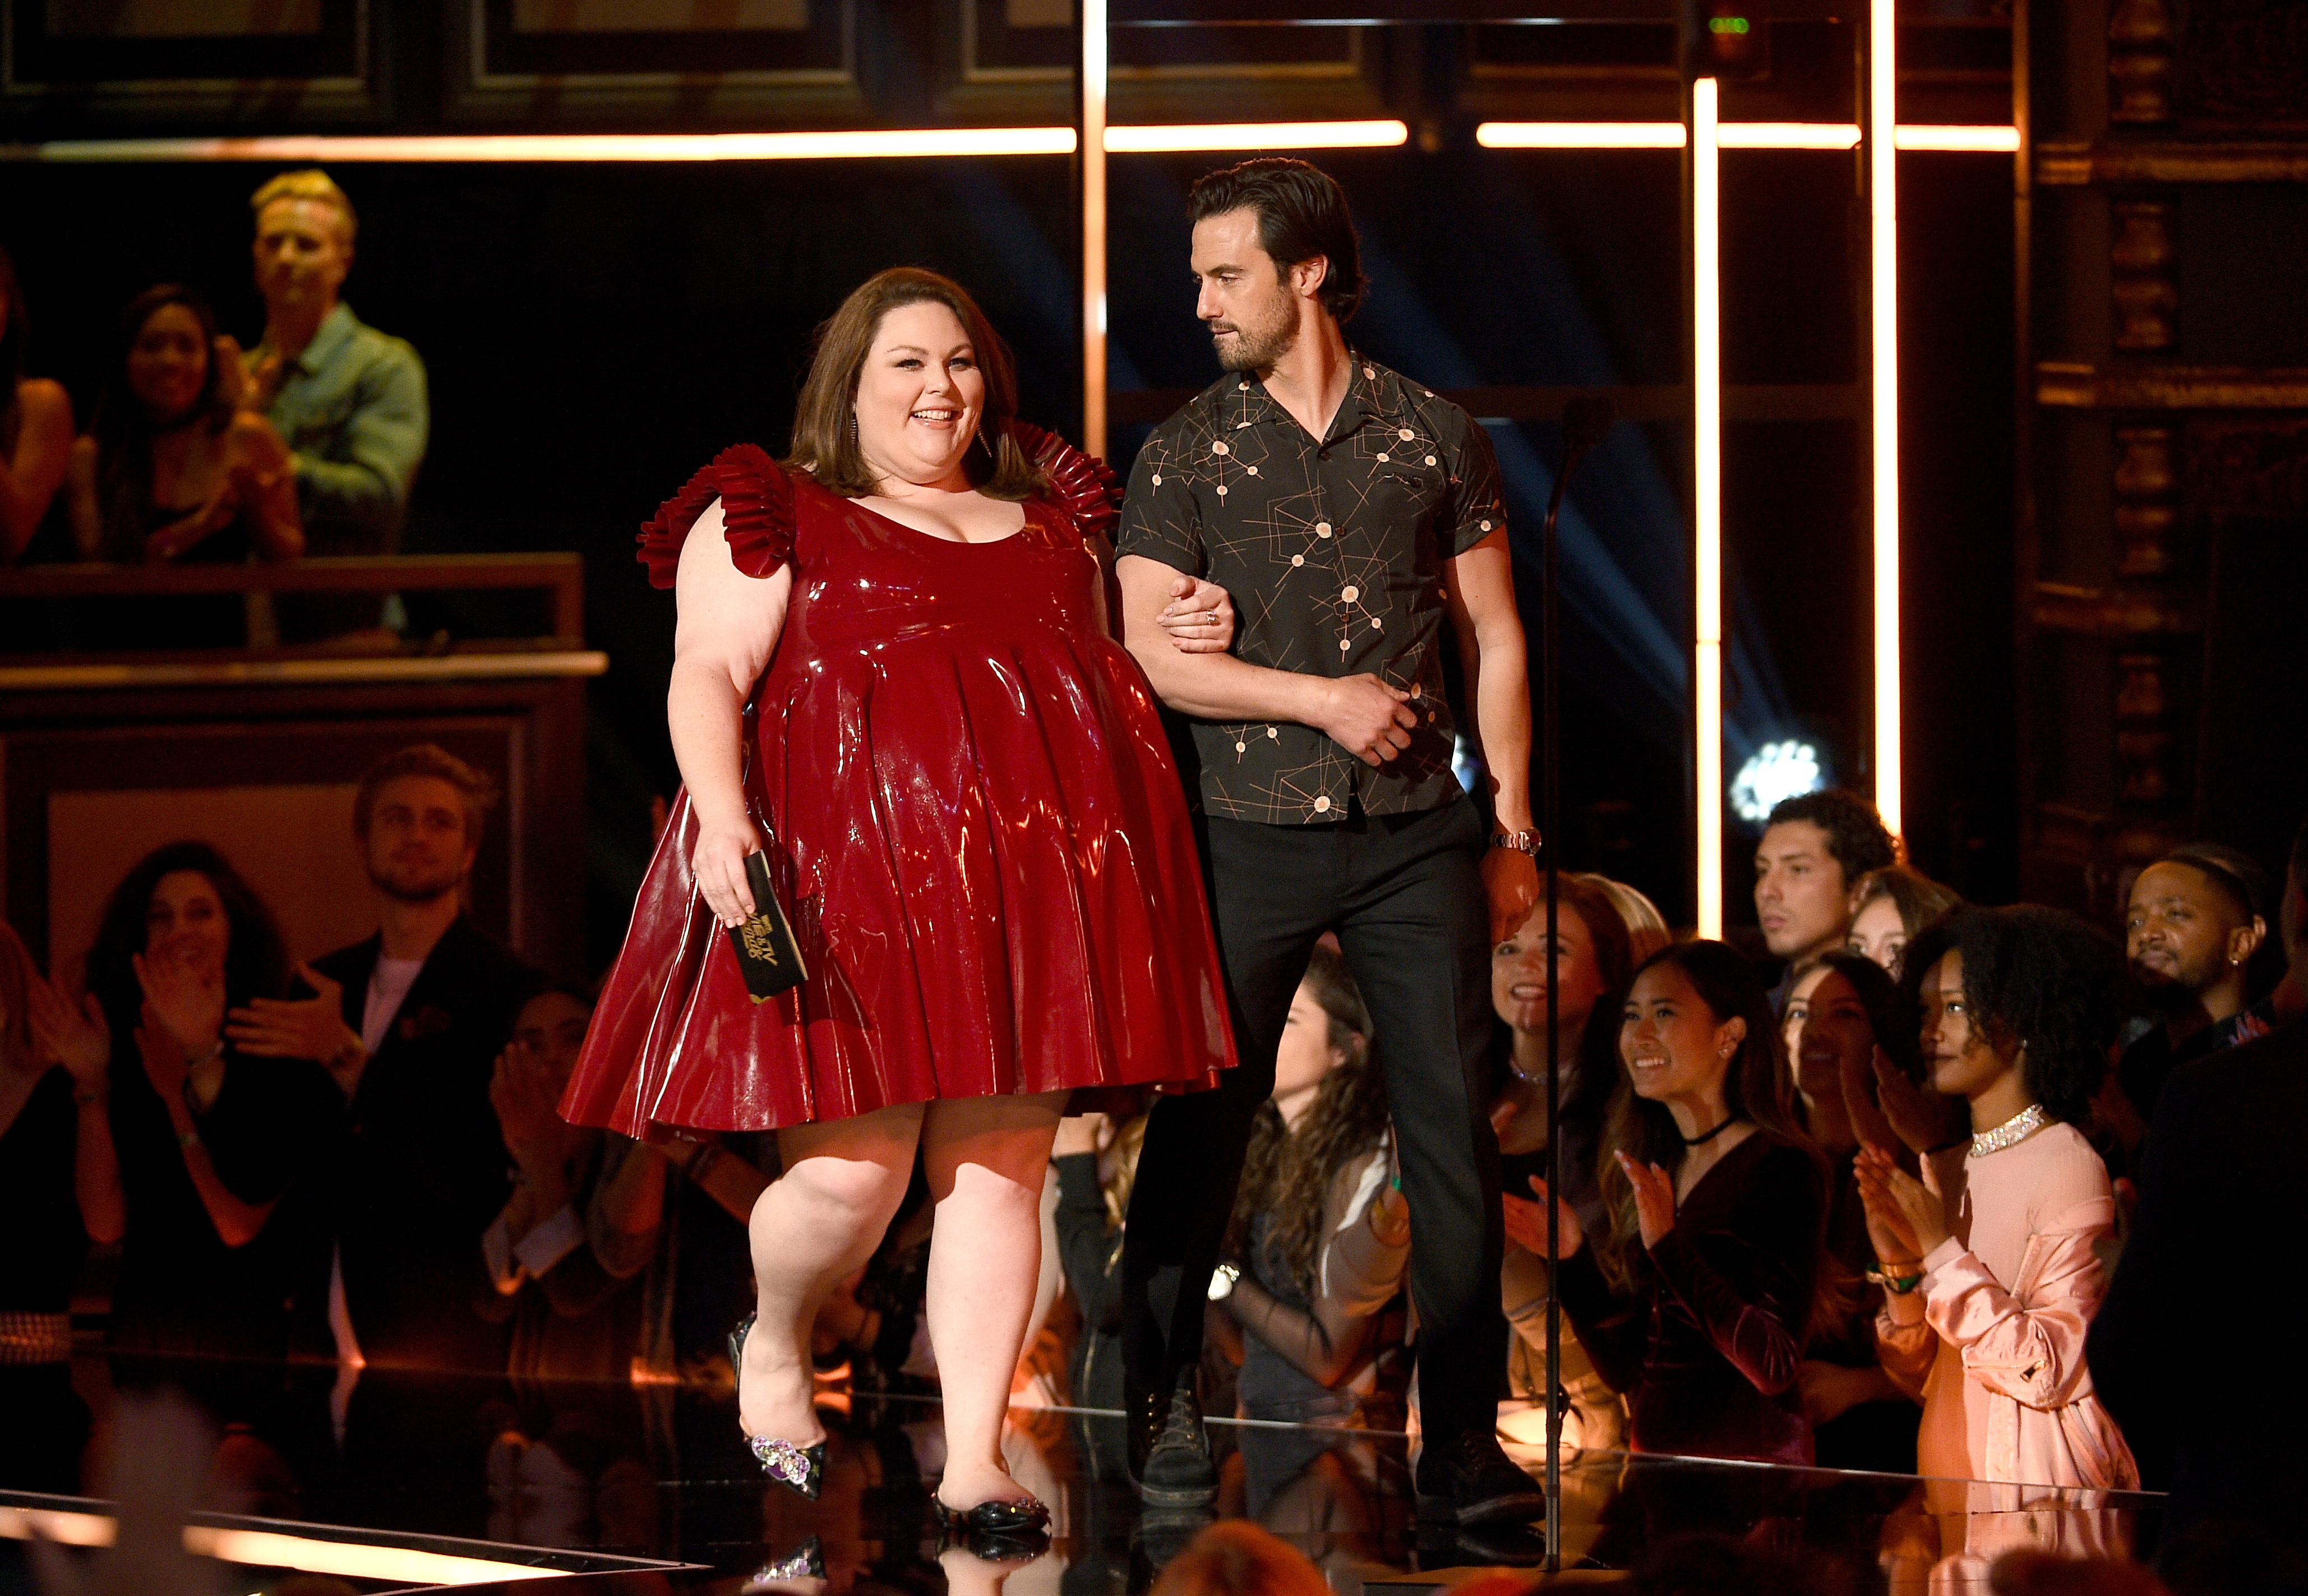 Actors Chrissy Metz and Milo Ventimiglia onstage during the 2017 MTV Movie And TV Awards at The Shrine Auditorium on May 7, 2017 in Los Angeles, California. (Jeff Kravitz&mdash;FilmMagic)